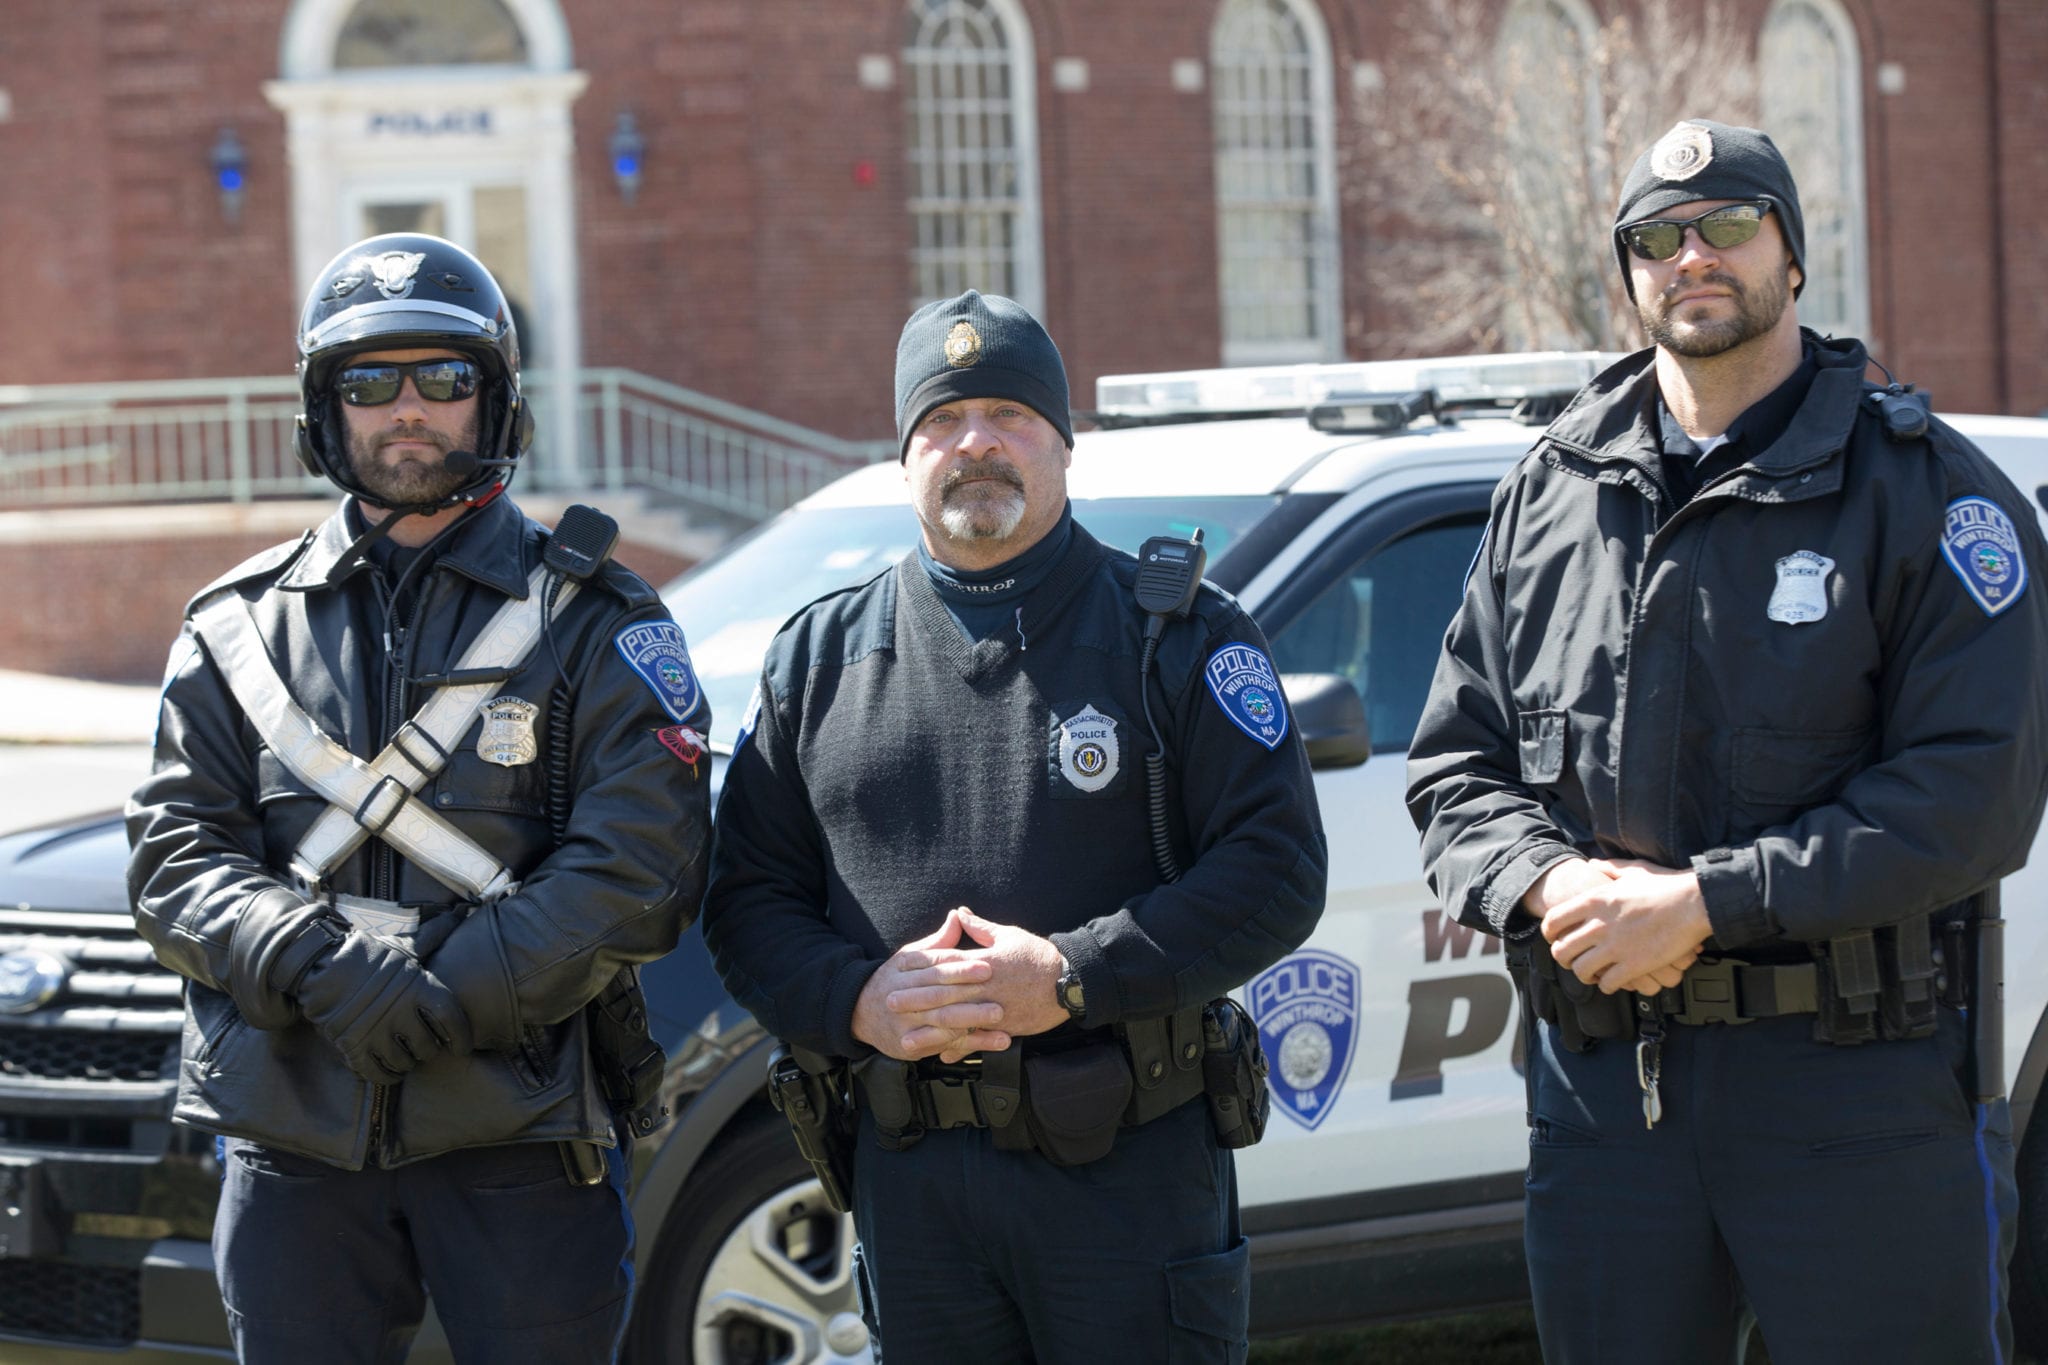 Winthrop Police Officers